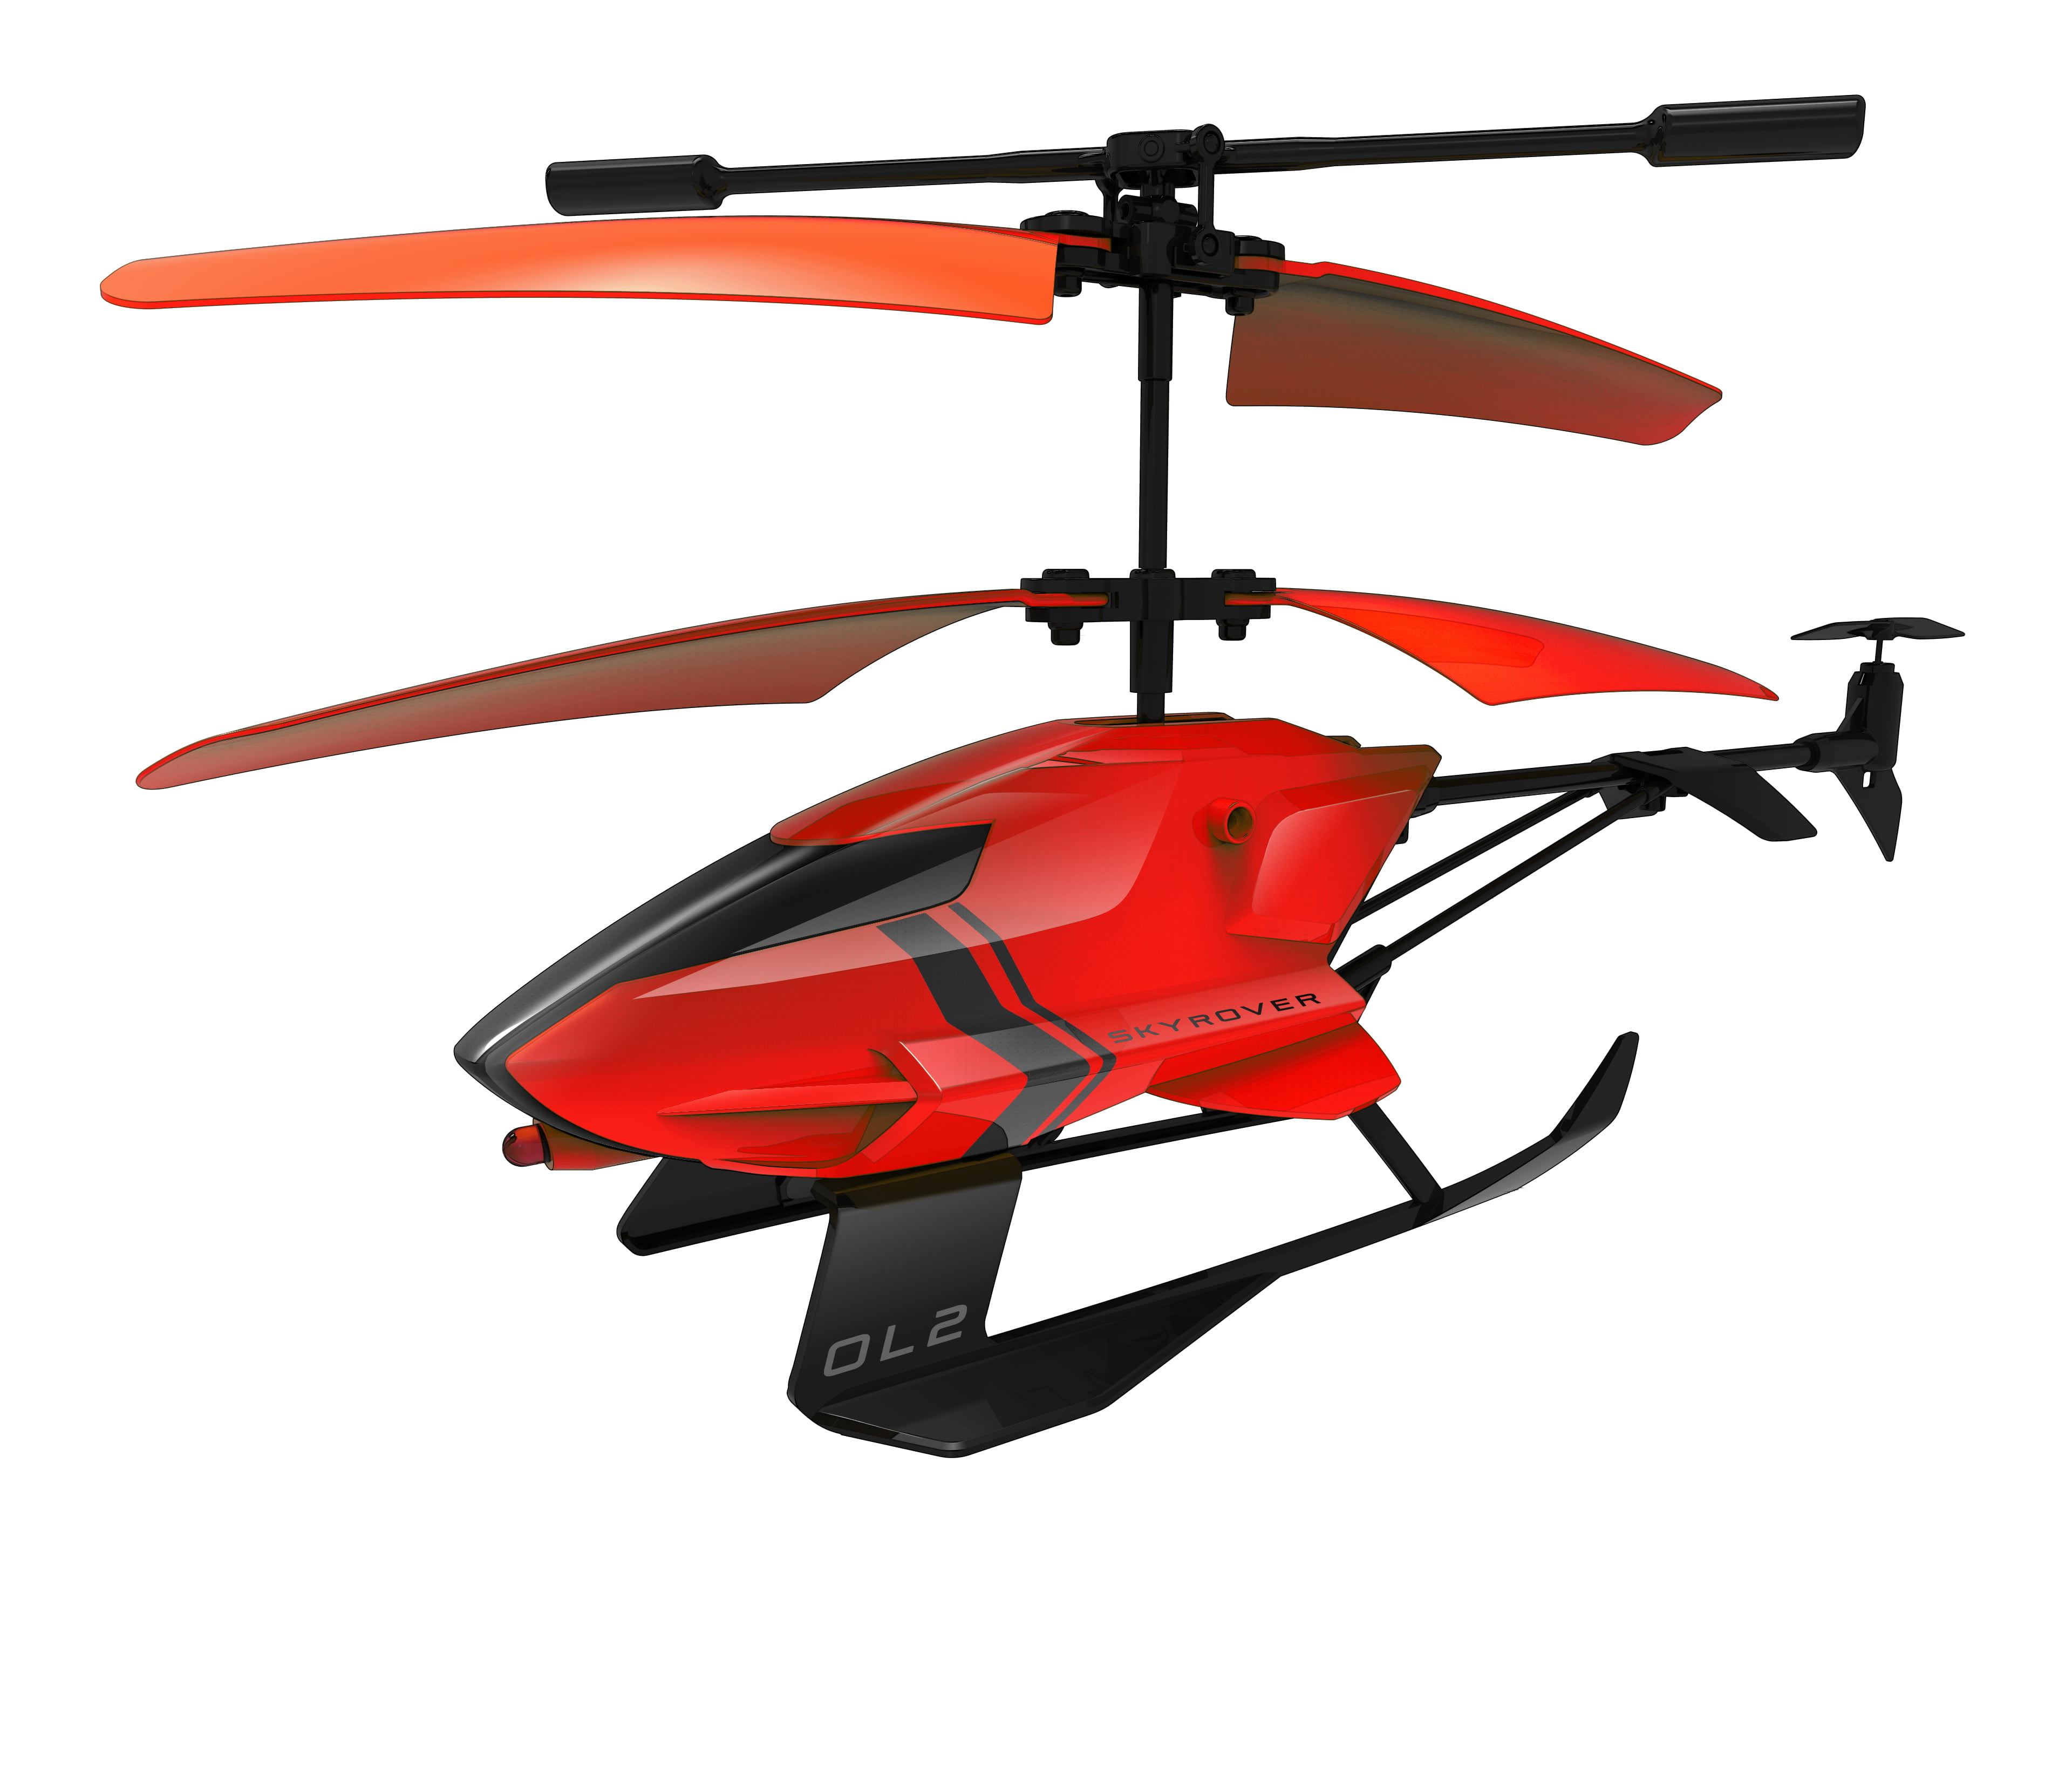 sky rover remote control helicopter